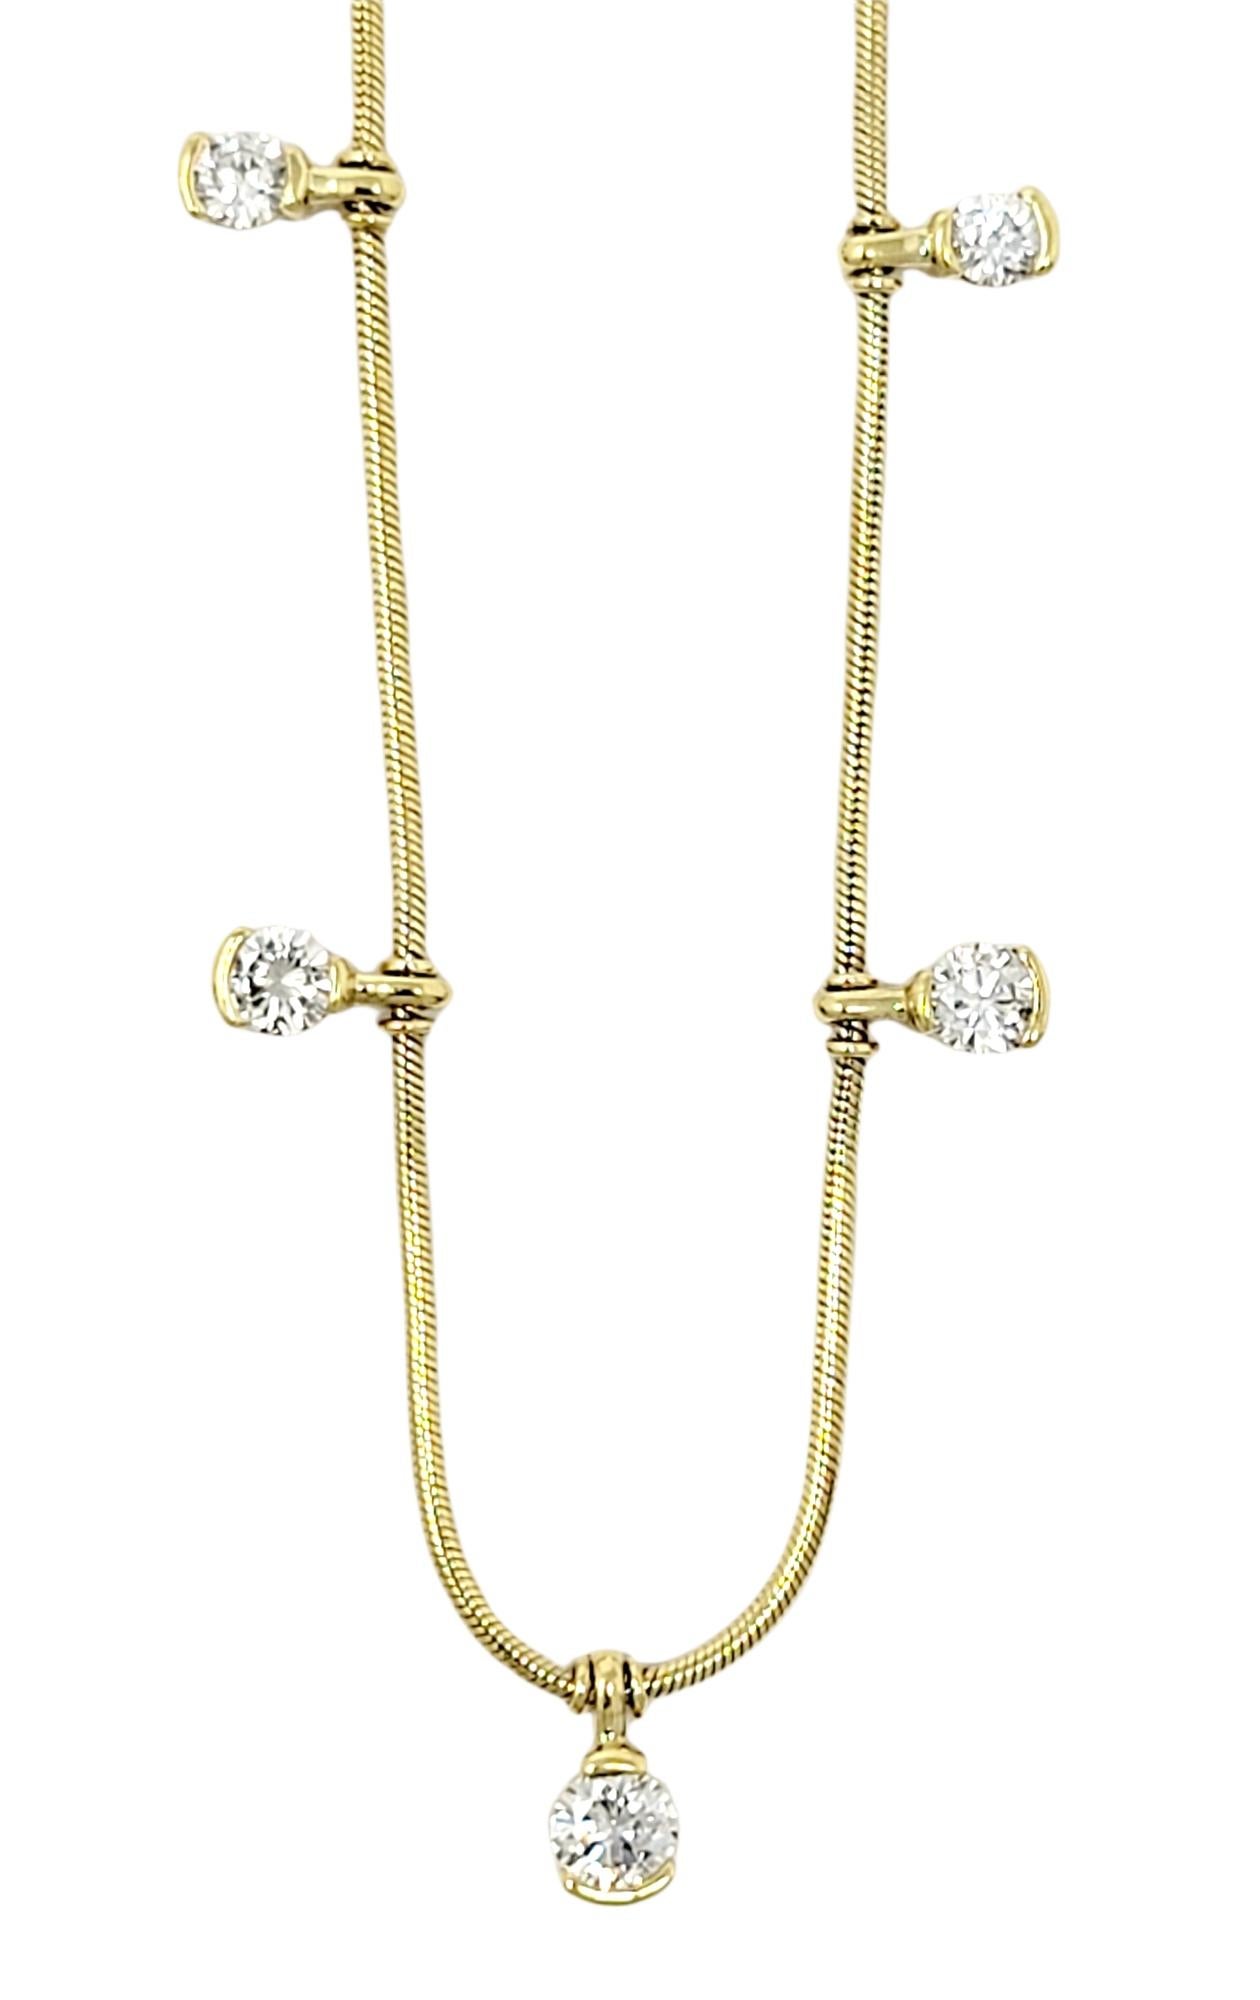 This gorgeous diamond station necklace is the perfect blend of simplicity and elegance.  Featuring a delicate snake chain and a dangling diamond motif, this lovely necklace goes with just about everything. This beautiful piece features 5 half bezel